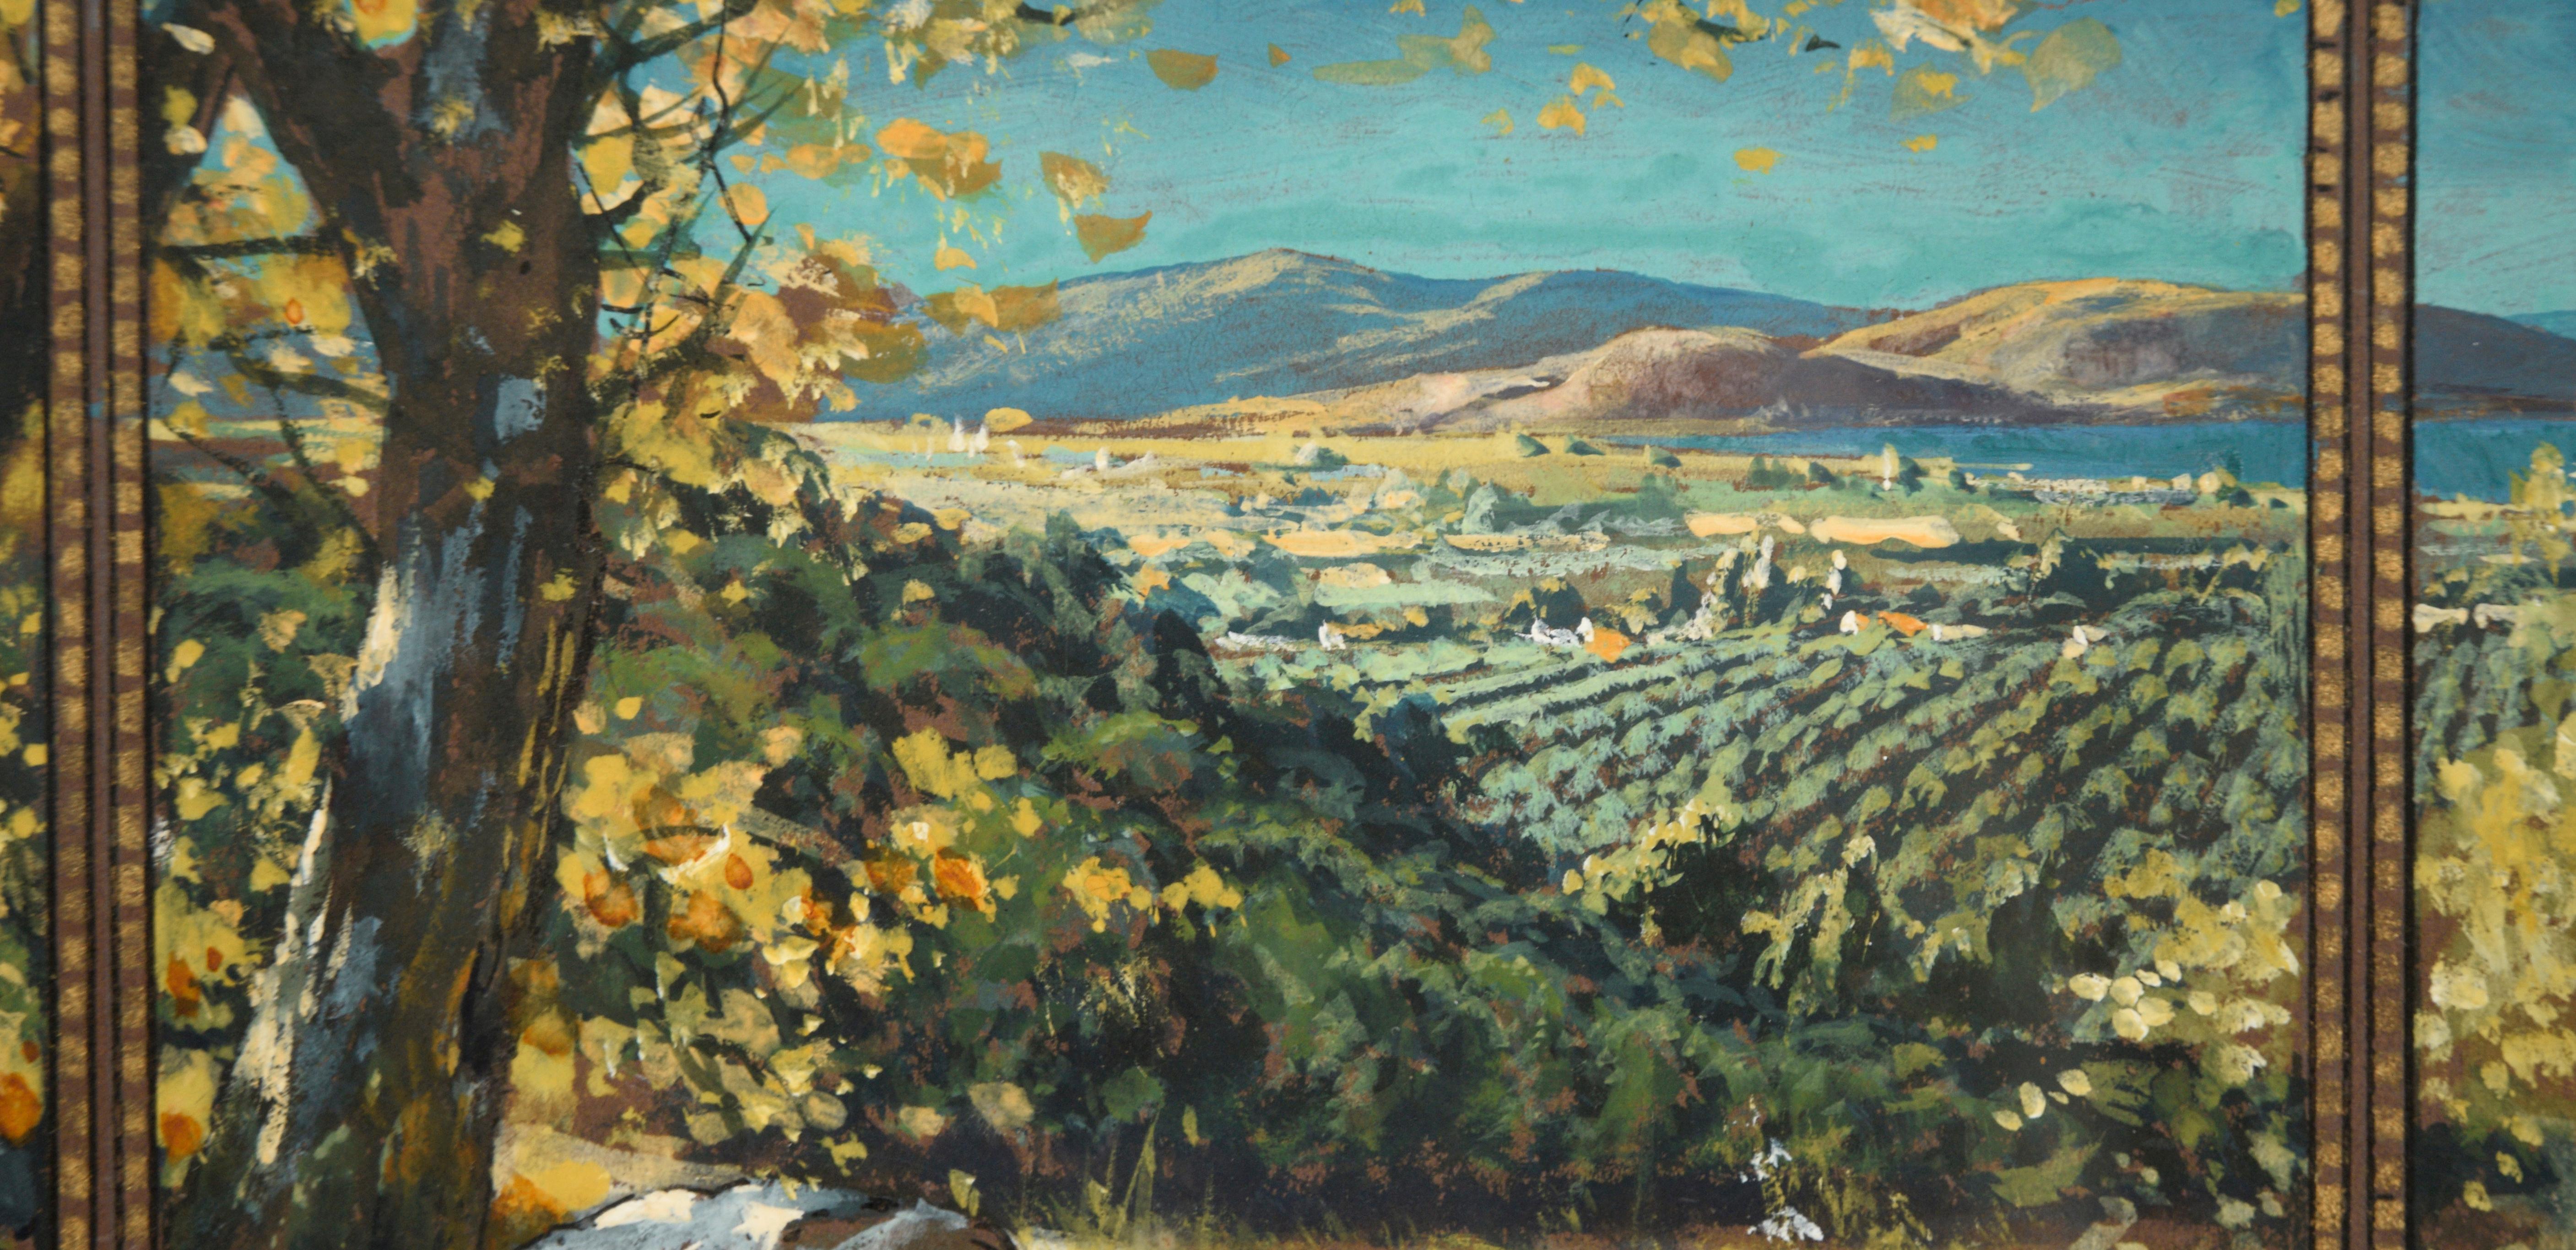 Looking Out Over the Vineyards, Early 20th Century Landscape Panorama  - Art Nouveau Painting by California School